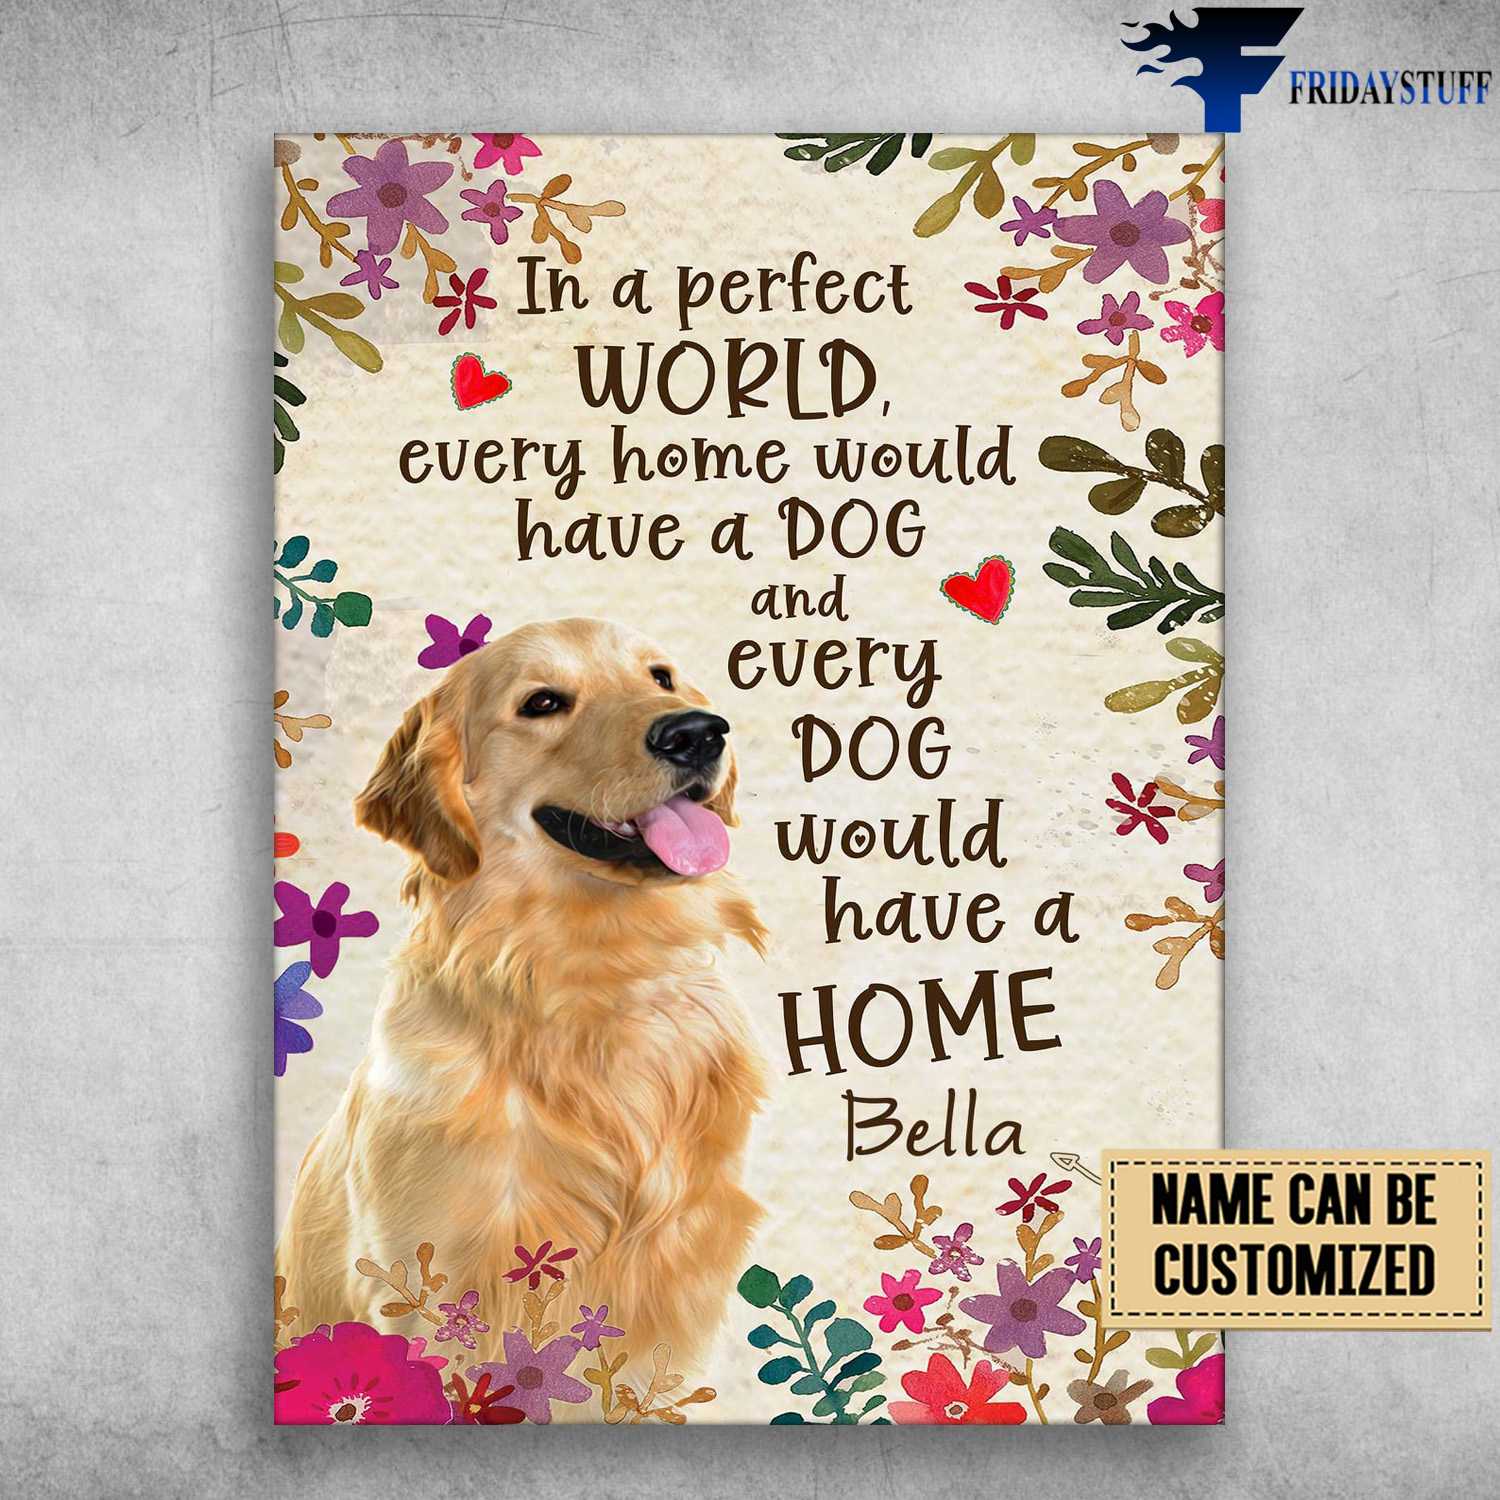 Golden Retriever Poster, Dog Lover, In A Perfect World, Every Home Would, Every Home Would Have A Dog, And Every Dog Would Have A Home